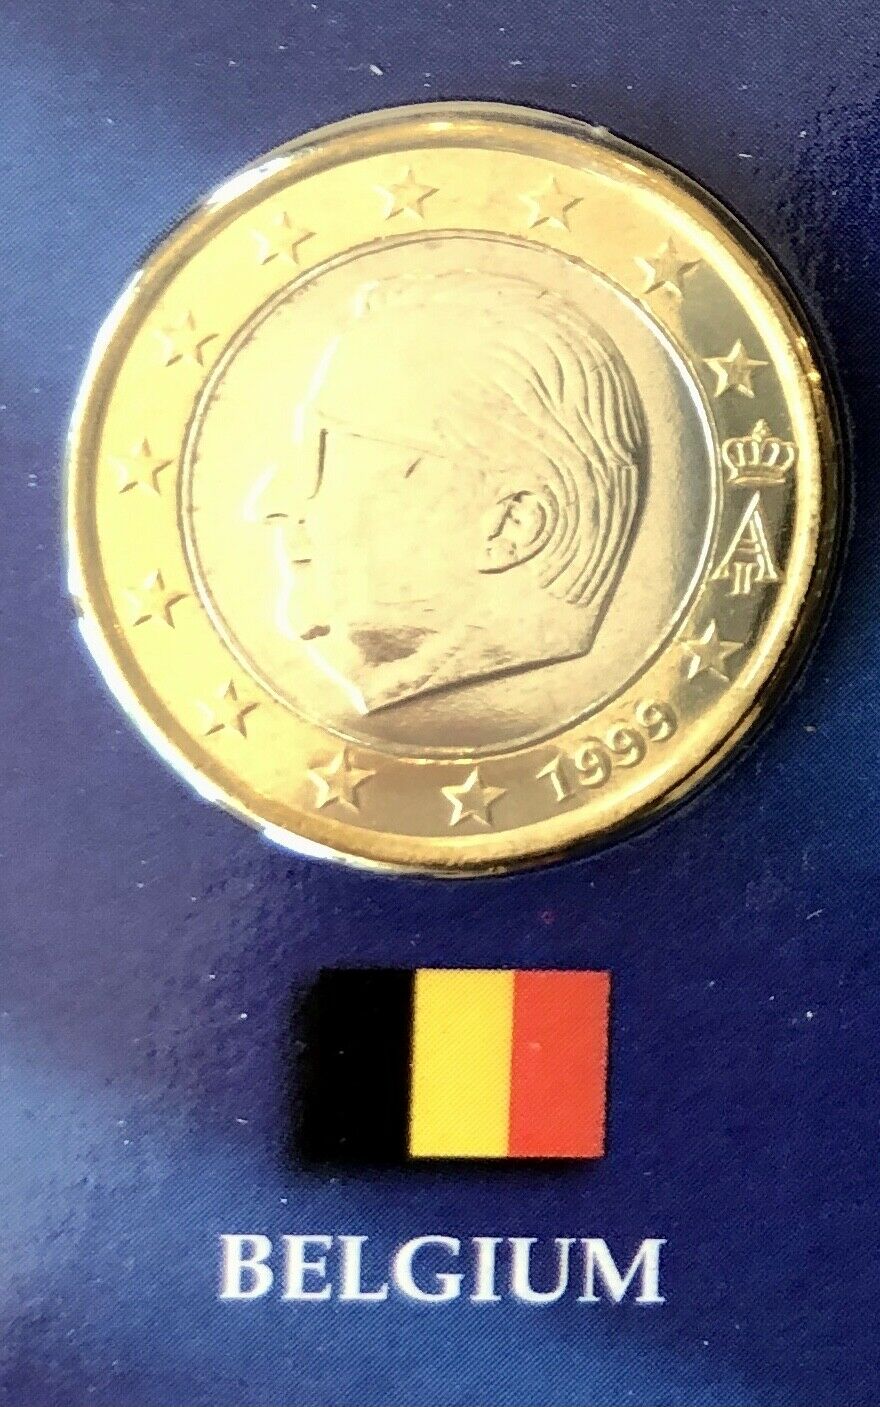 2002 Belgium 1 Euro Coin From Us Mint State Quarters & Euro Coin Set - Free Ship